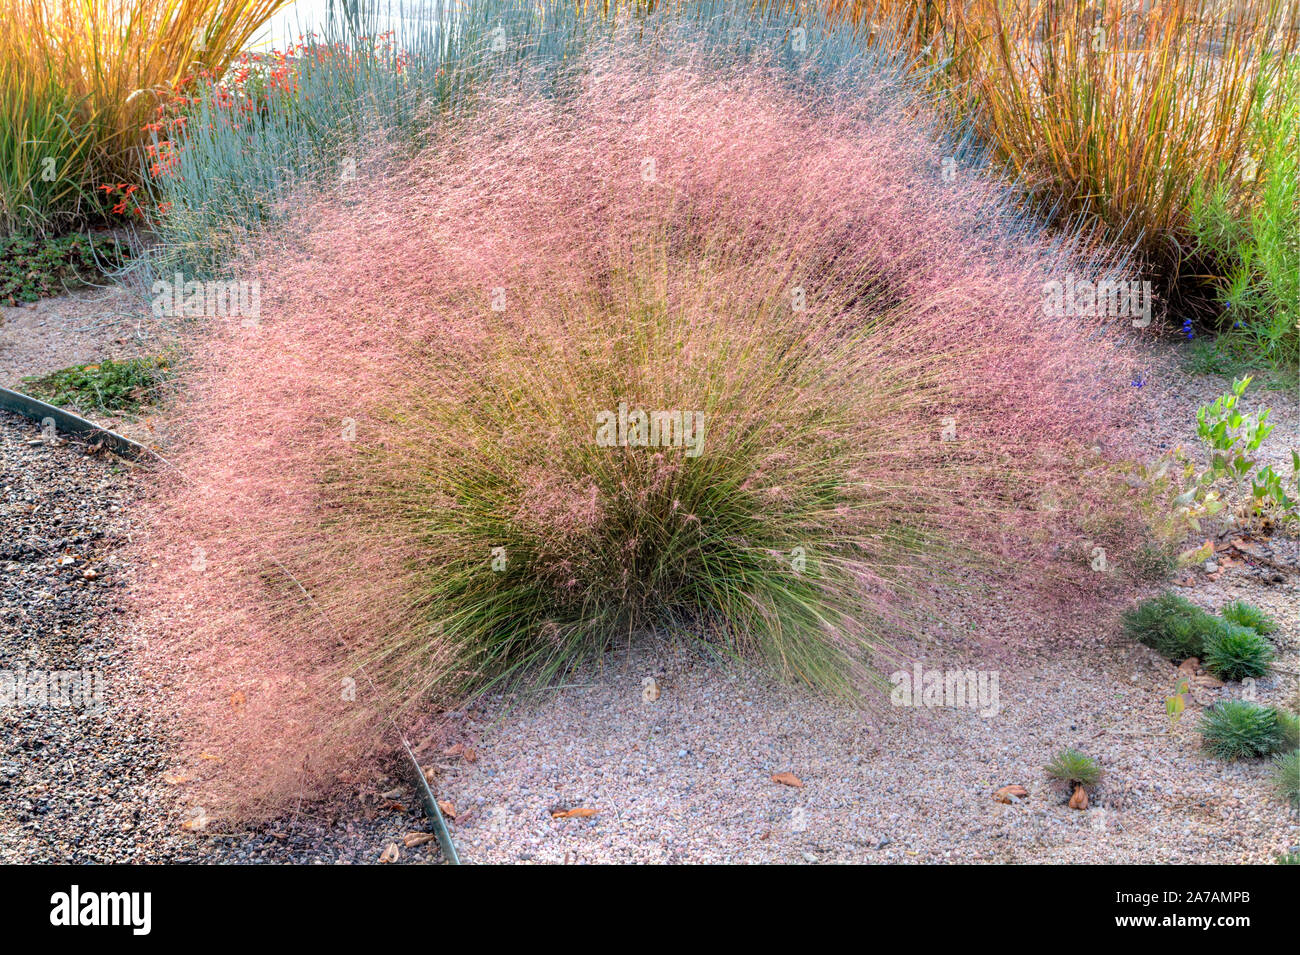 A portrait of an ornamental grass named Undaunted Ruby Muhly and sometimes called Autumn Embers. Stock Photo